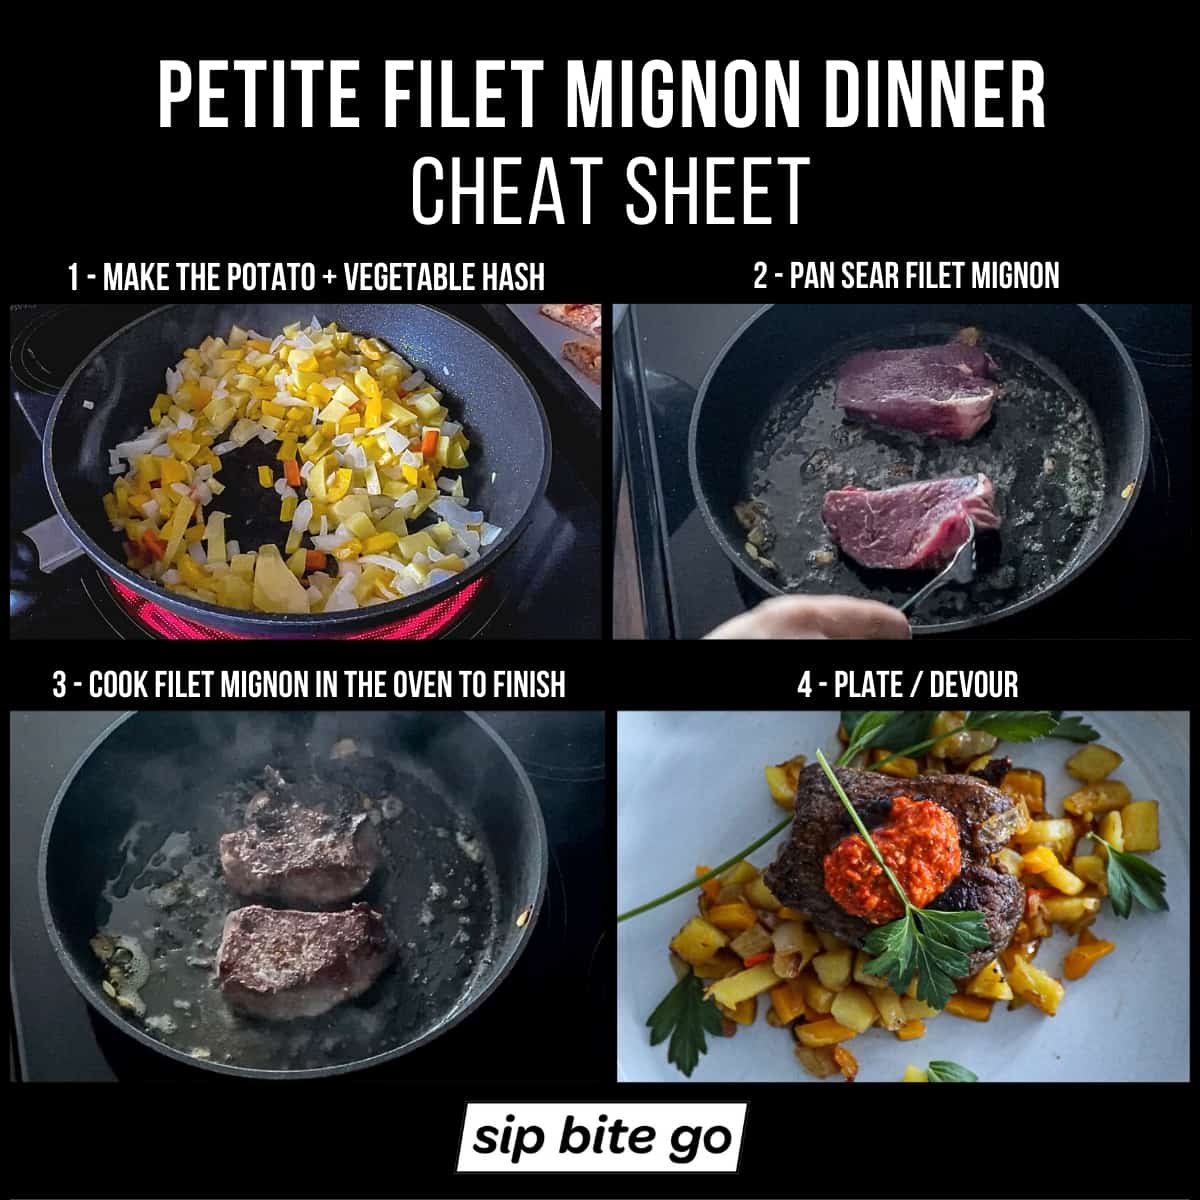 Infographic demonstrating how to cook petite filet mignon with potato hash one pan meal